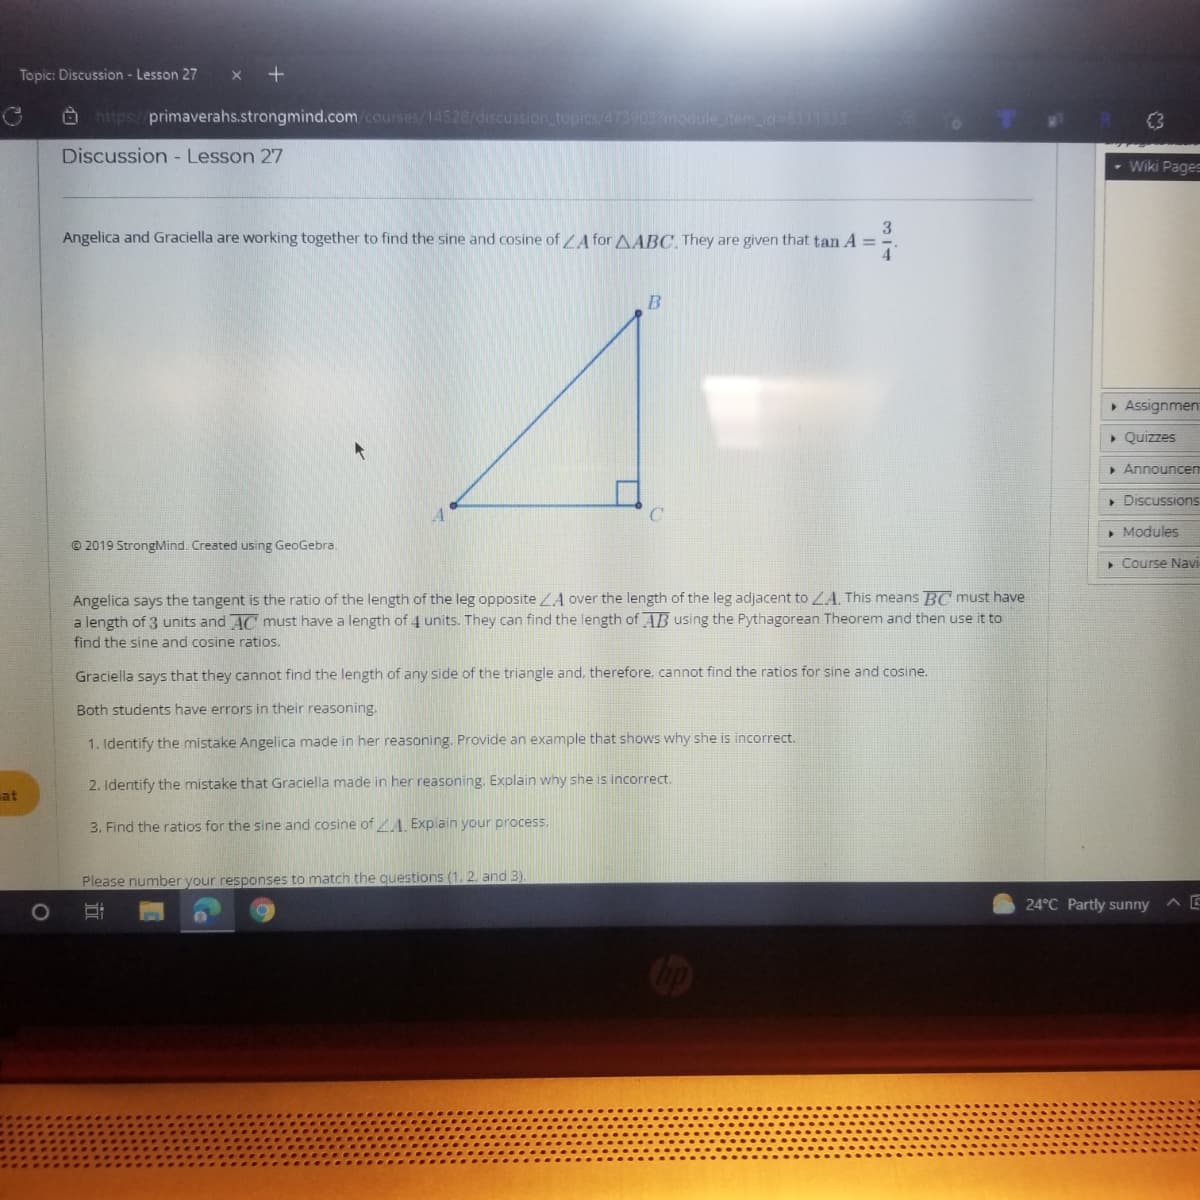 Topic: Discussion - Lesson 27
O https://primaverahs.strongmind.com.courses/14528/discussion topics/4739037module item d-611133
Discussion - Lesson 27
- Wiki Pages
3
Angelica and Graciella are working together to find the sine and cosine of LA for AABC, They are given that tan A =
4
> Assignmen
» Quizzes
» Announcen
• Discussions
» Modules
© 2019 StrongMind. Created using GeoGebra.
» Course Navi
Angelica says the tangent is the ratio of the length of the leg opposite ZA over the length of the leg adjacent to LA. This means BC must have
a length of 3 units and AC must have a length of 4 units. They can find the length of AB using the Pythagorean Theorem and then use it to
find the sine and cosine ratios.
Graciella says that they cannot find the length of any side of the triangle and, therefore, cannot find the ratios for sine and cosine.
Both students have errors in their reasoning.
1. Identify the mistake Angelica made in her reasoning. Provide an example that shows why she is incorrect.
2. Identify the mistake that Graciella made in her reasoning. Explain why she is incorrect.
at
3. Find the ratios for the sine and cosine ofA. Explain your process.
Please number your responses to match the questions (1, 2. and 3).
24°C Partly sunny
